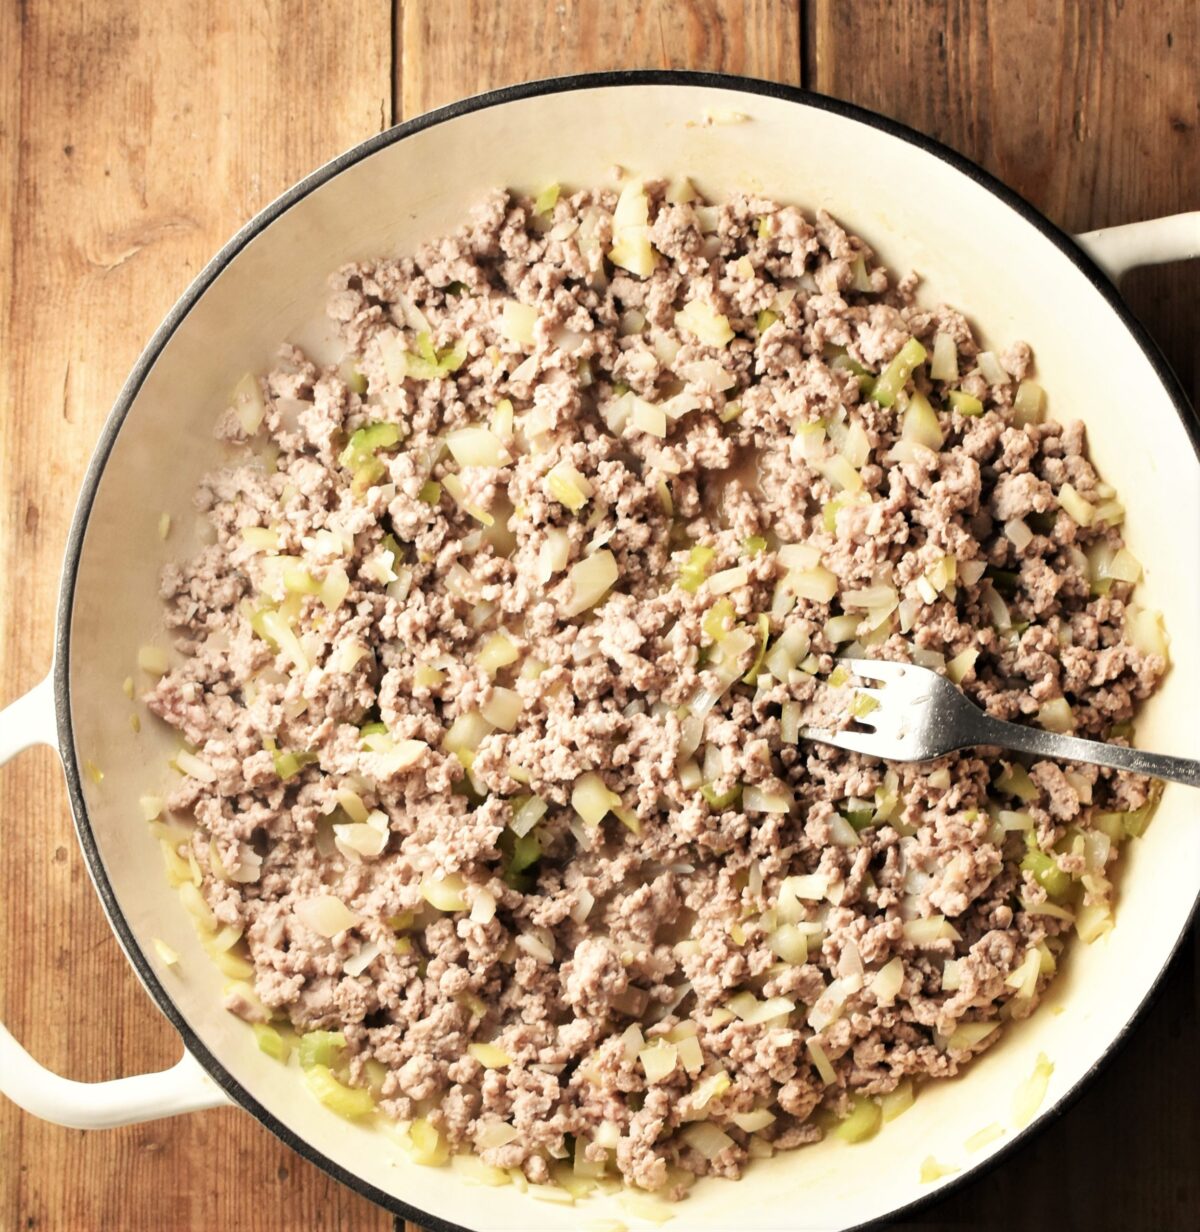 Ground turkey and chopped onions in large shallow white dish with fork.